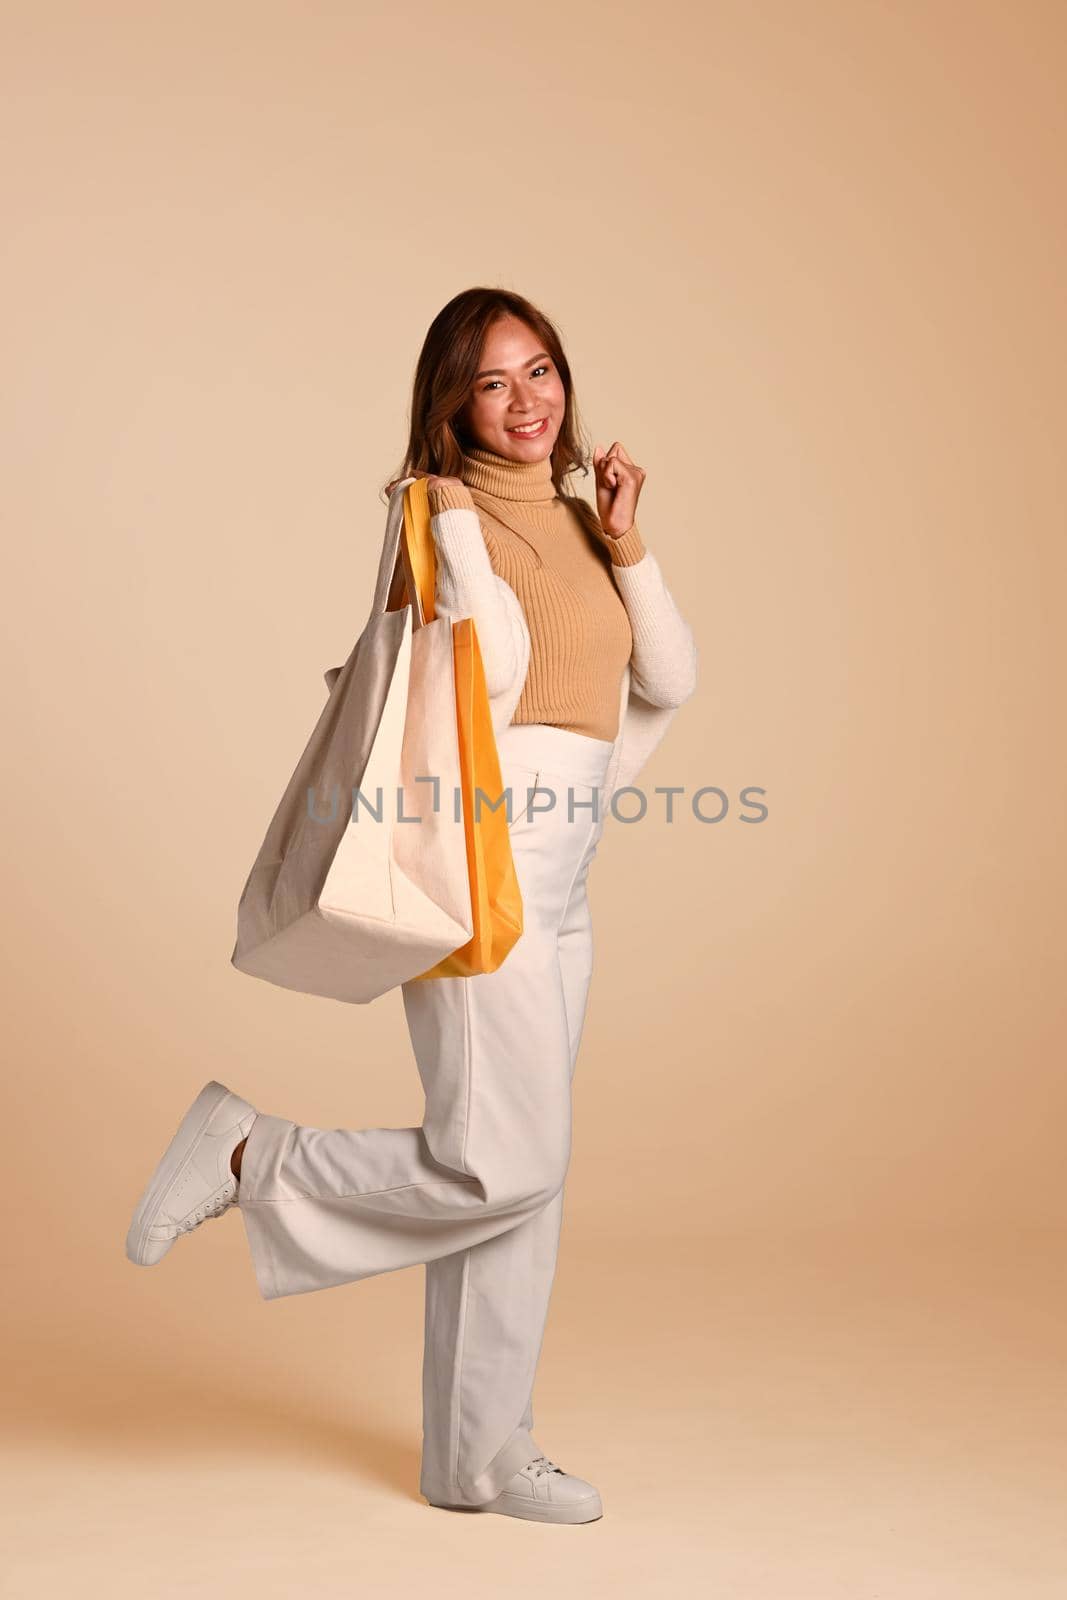 Full length of beautiful woman in warm sweater holding shopping bags standing on beige background. Black Friday concept by prathanchorruangsak